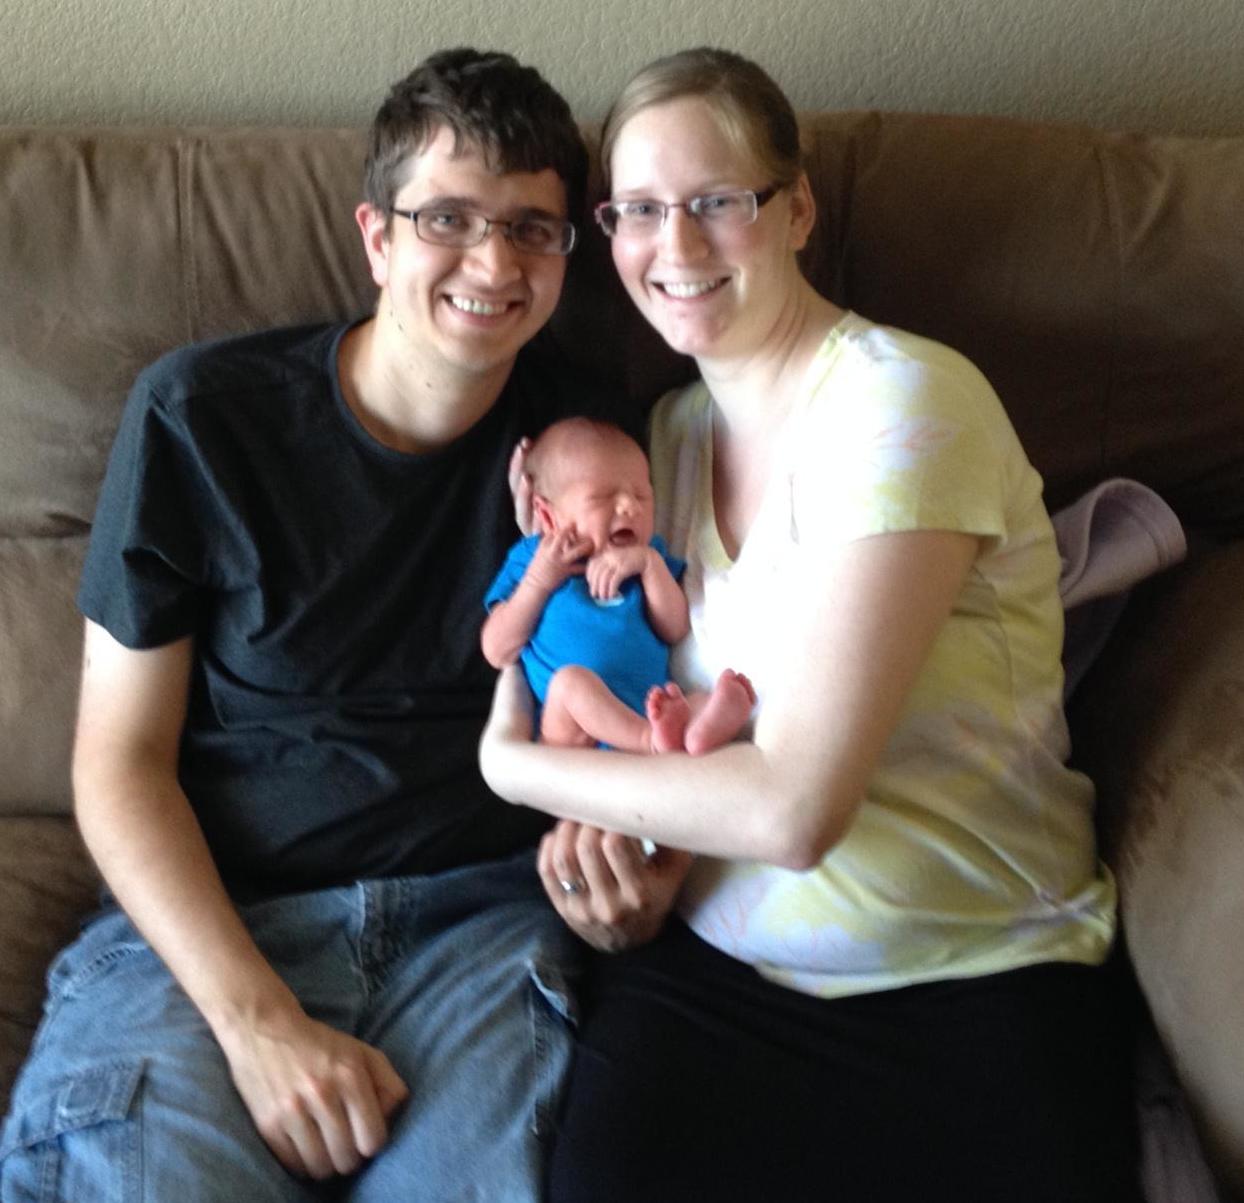 Proud new parents, Jimmy and Seanica with new son Dillon